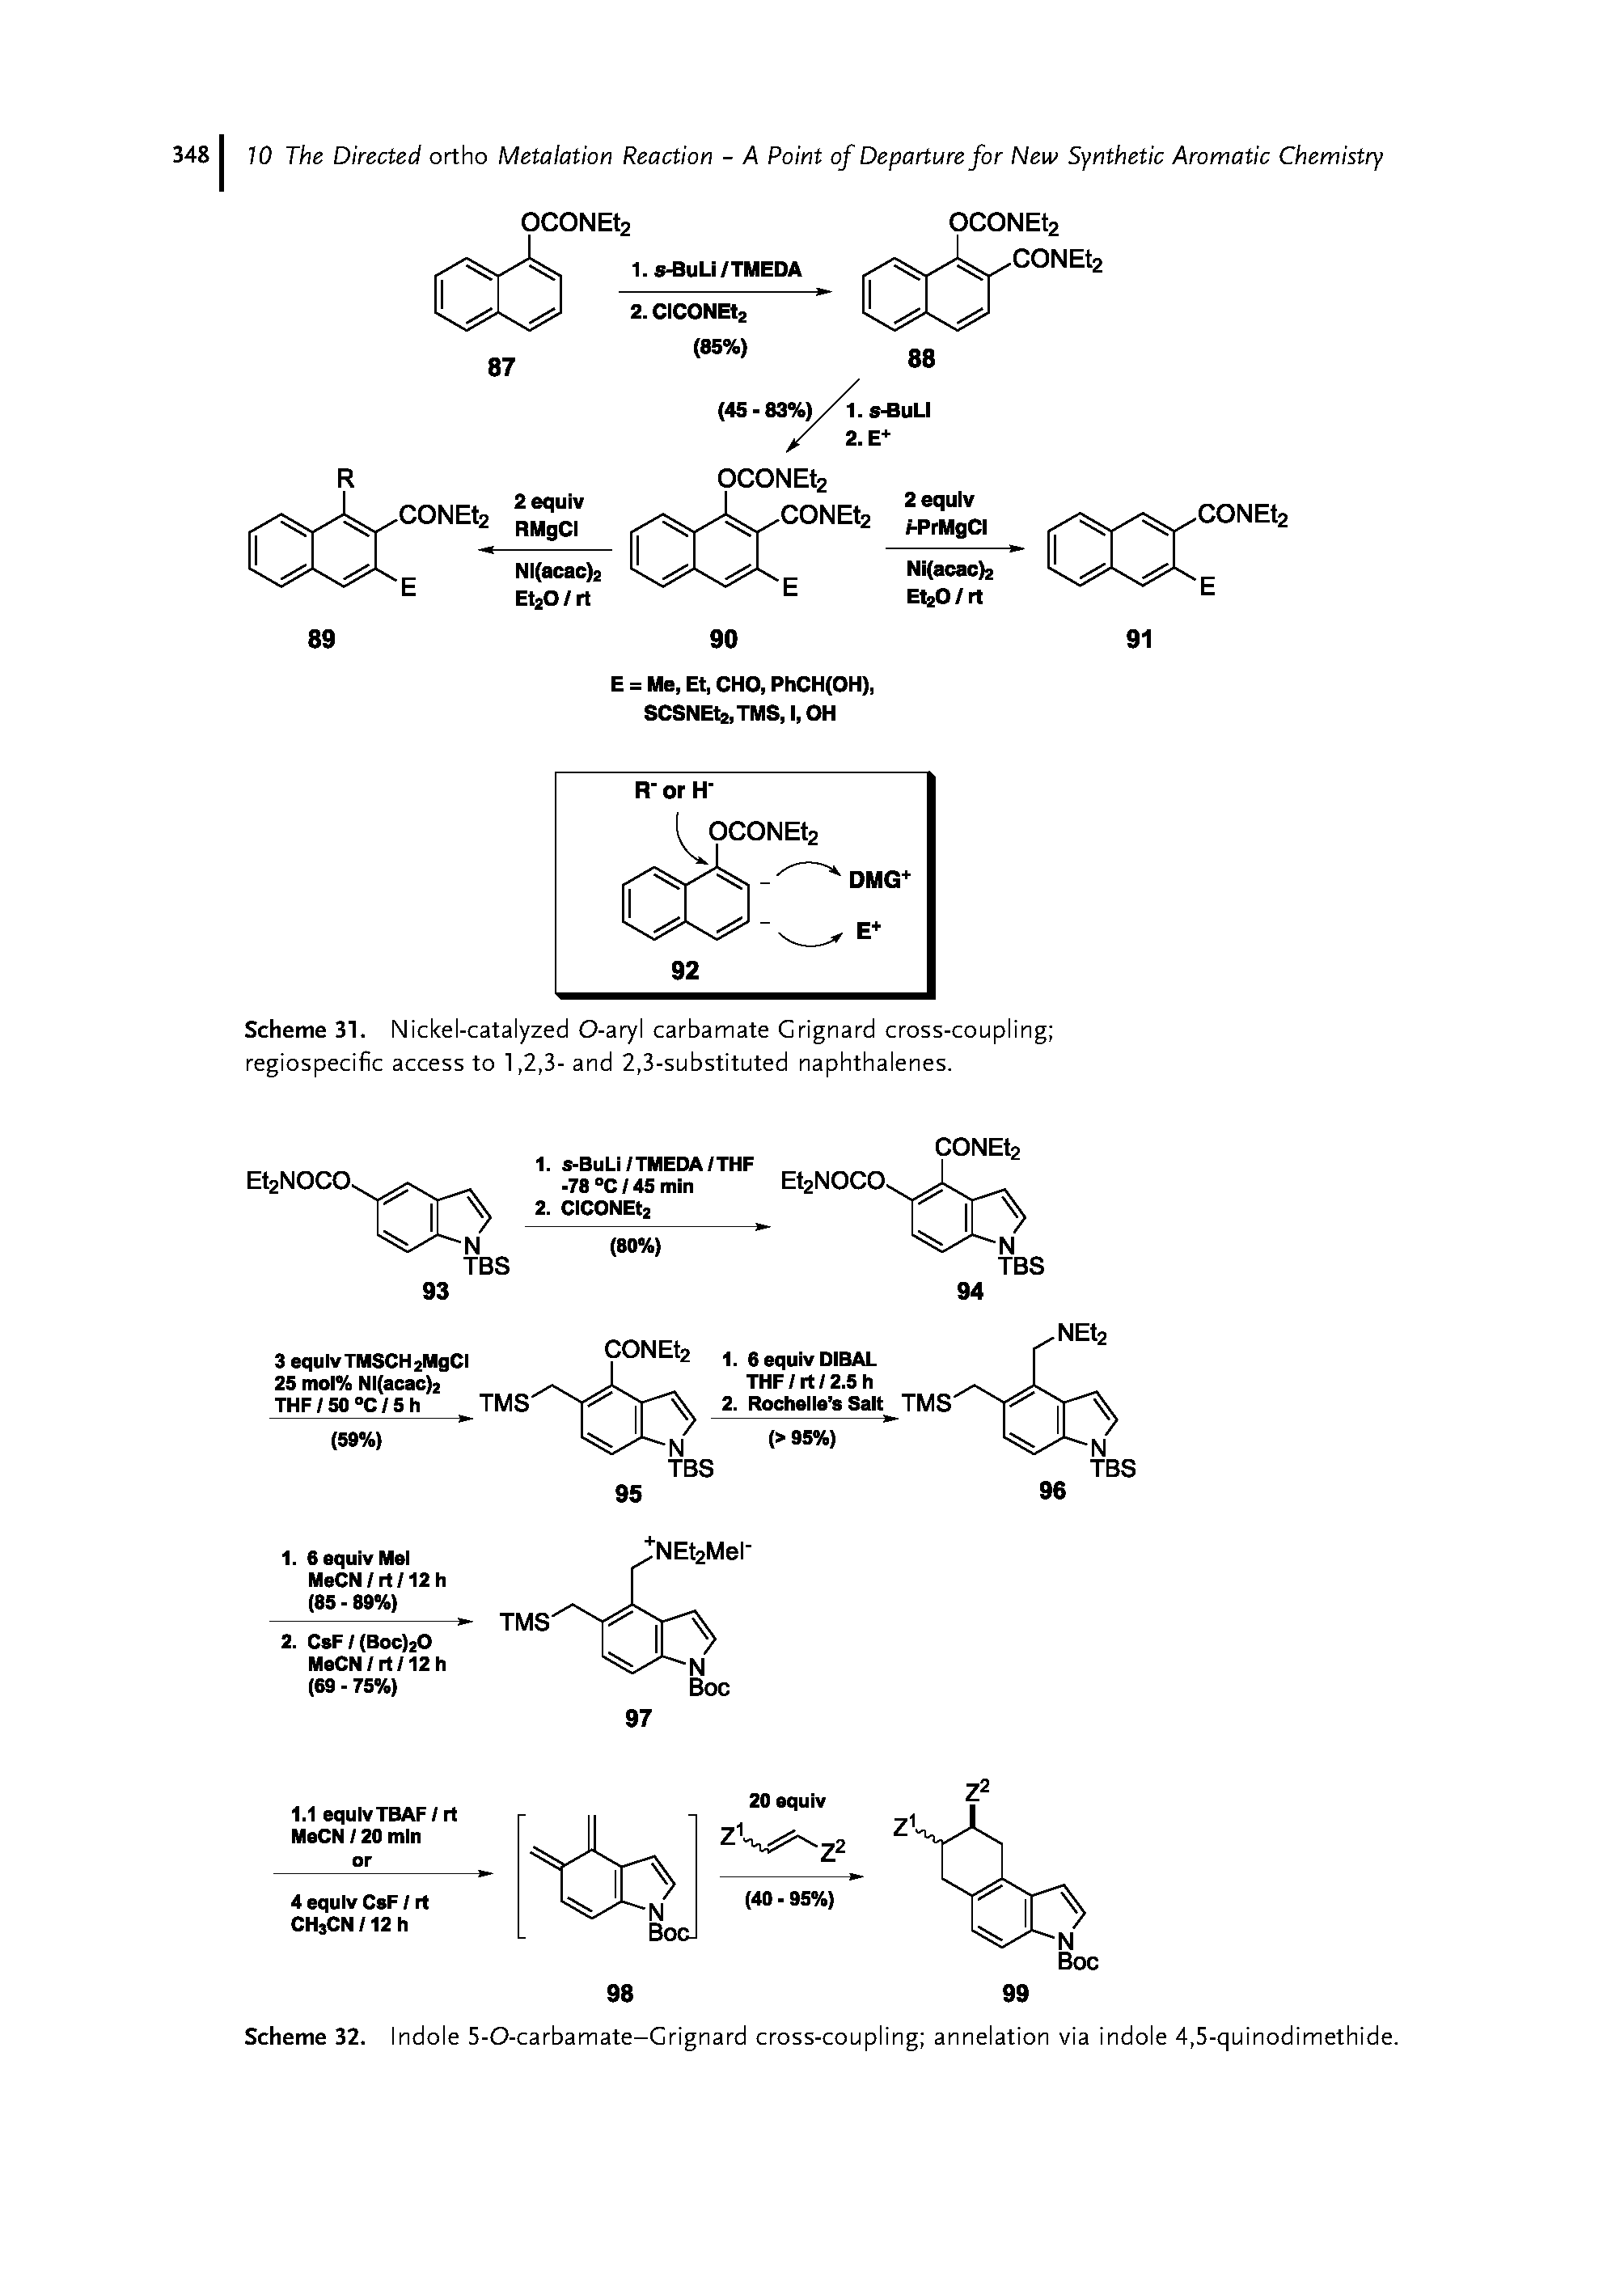 Scheme 31. Nickel-catalyzed O-aryl carbamate Crignard cross-coupling regiospecific access to 1,2,3- and 2,3-substituted naphthalenes.